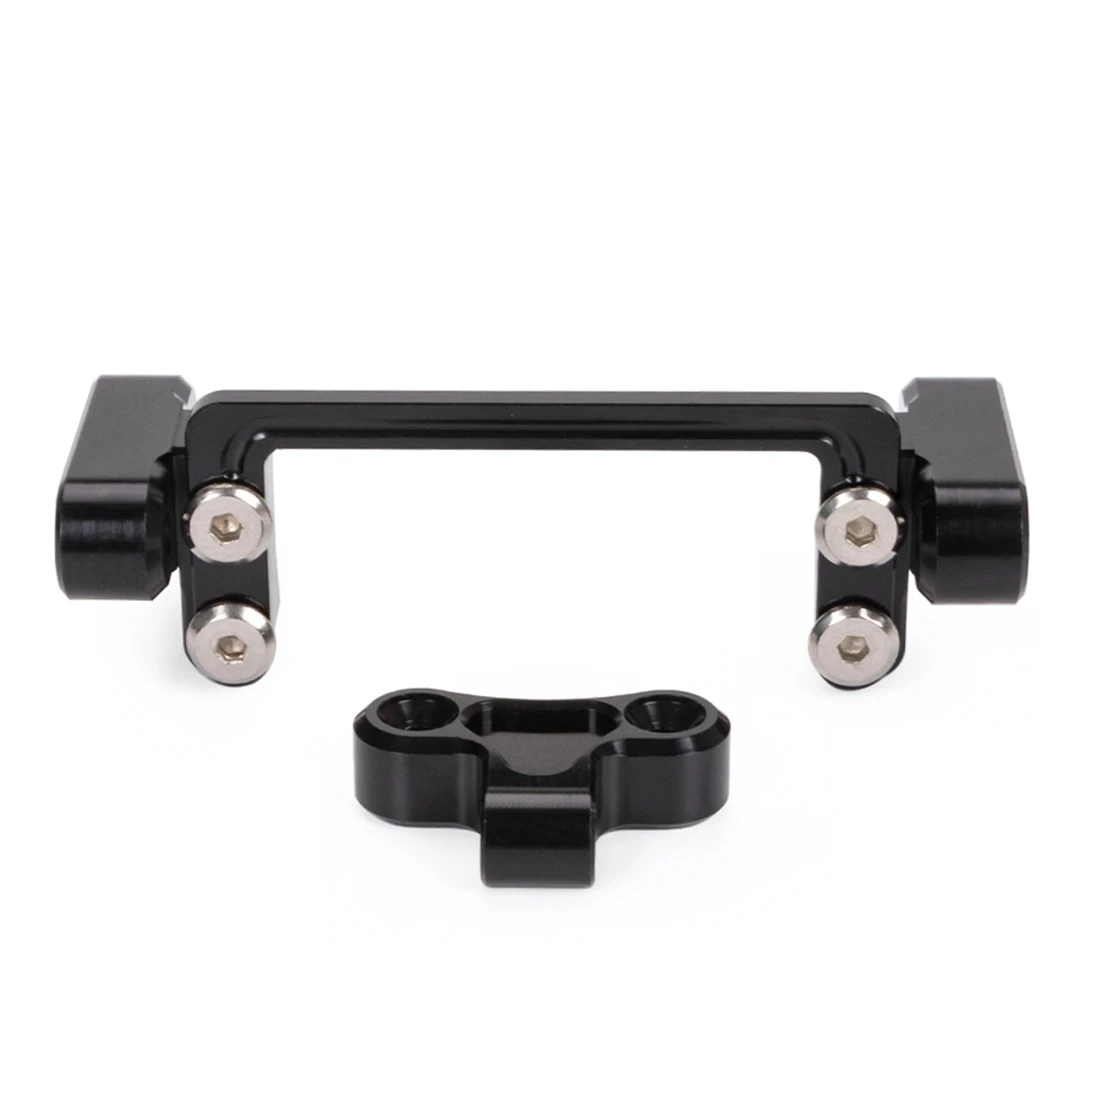 

Lower Center Of Gravity LCG Chassis Bumper Mount Servo Mount Beam for 1/10 RC Crawler Axial SCX10 I II III Upgrades,3